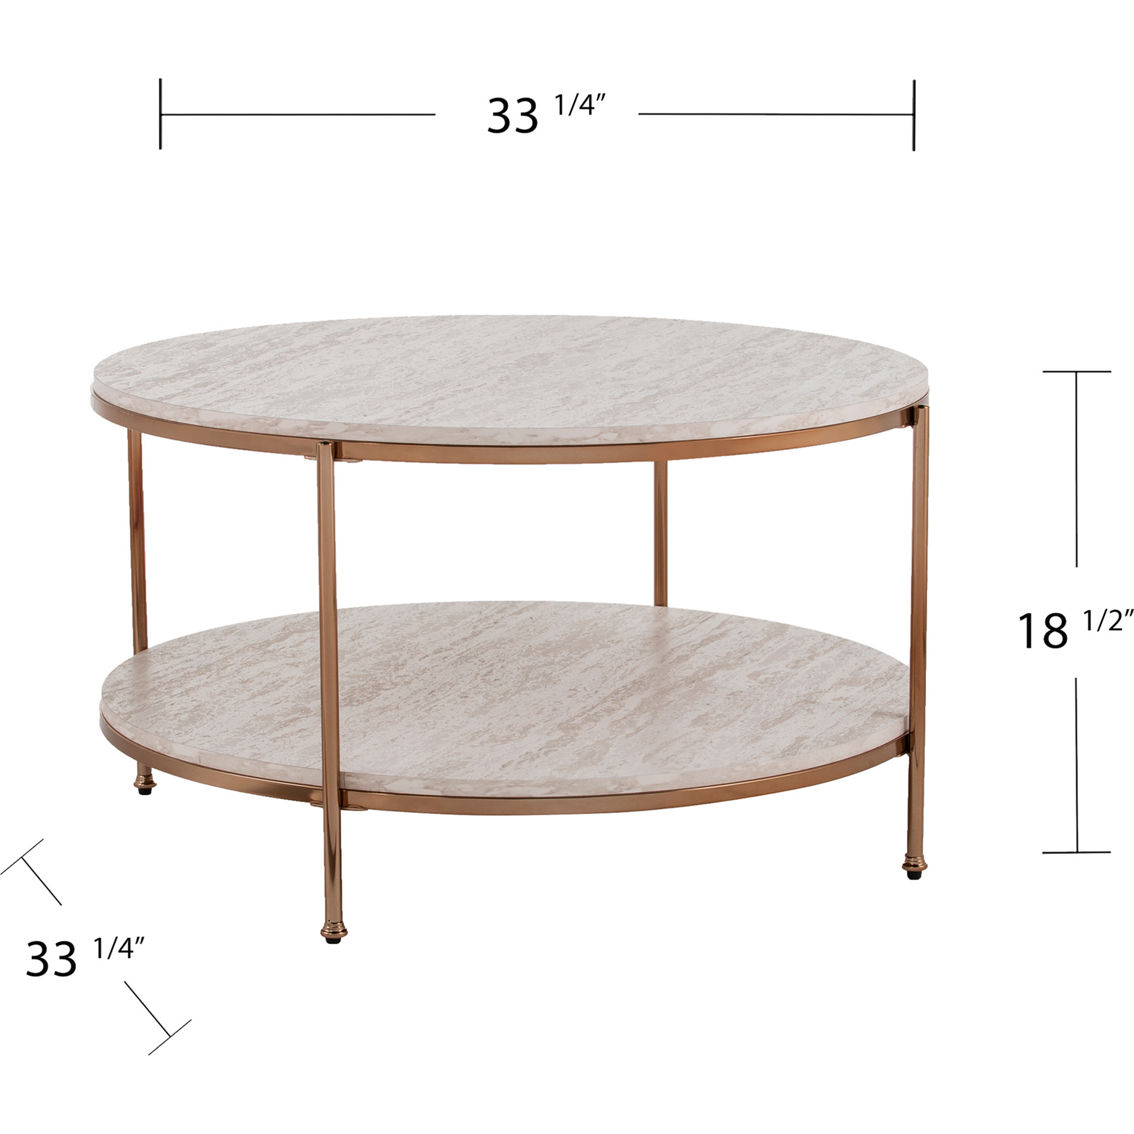 SEI Silas Round Faux Stone Cocktail Table - Image 4 of 4